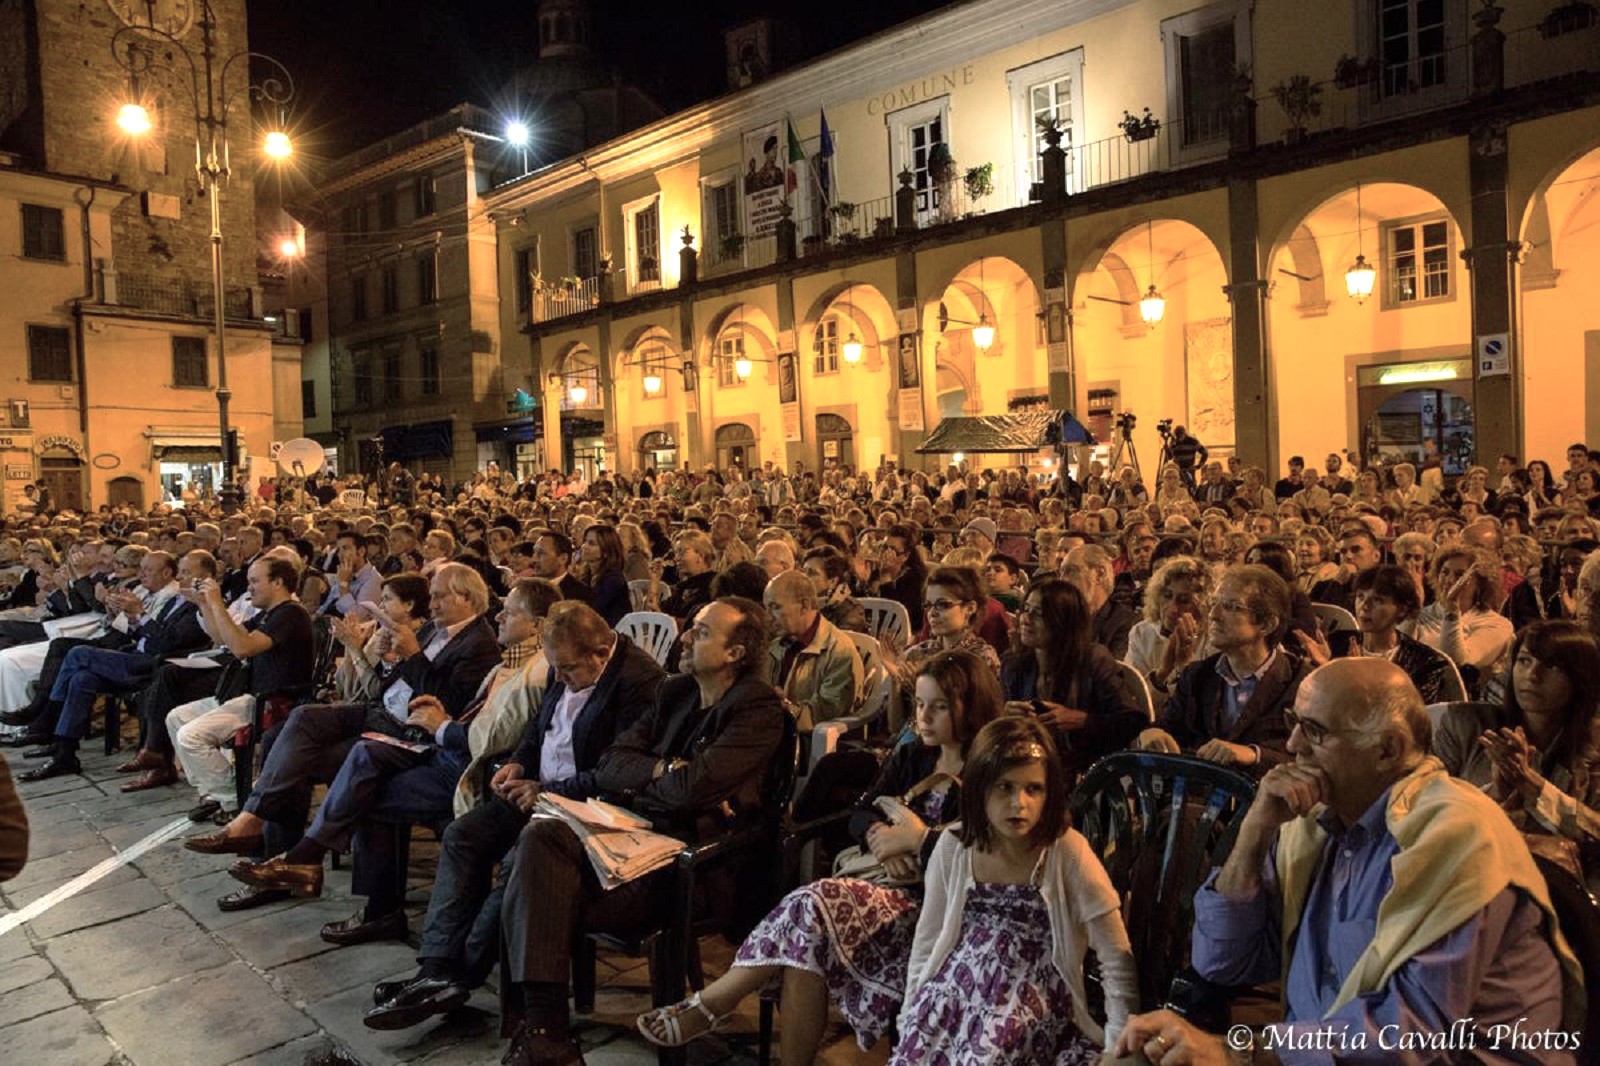 The famous literary prize which has taken place in Lunigiana, in the historic center of Pontremoli, for 72 years